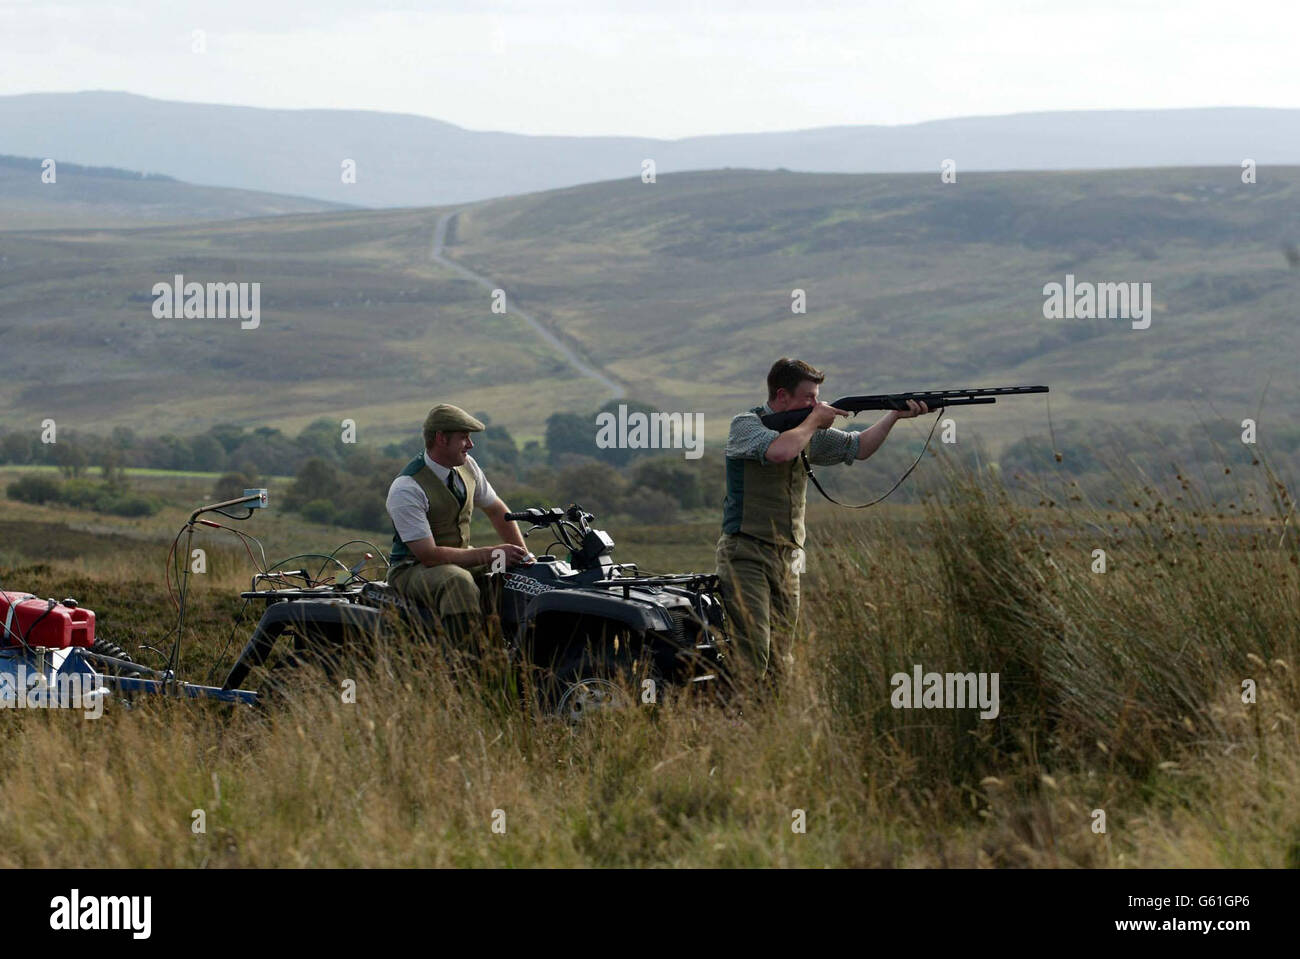 Game Keepers Craig Jones, 31, (left) and Phillip Savage, 20, who are taking part in an ongoing long-term study of wildlife in a remote part of Northumberland conducted by the Game Conservancy Trust, *...which has claimed moorland birds living in areas looked after by gamekeepers thrive better than those left to Mother Nature. According to the Trust, which is carrying out the eight-year study, human intervention can be good for ground-nesting birds such as the lapwing, curlew or golden plover which have been in decline. Stock Photo